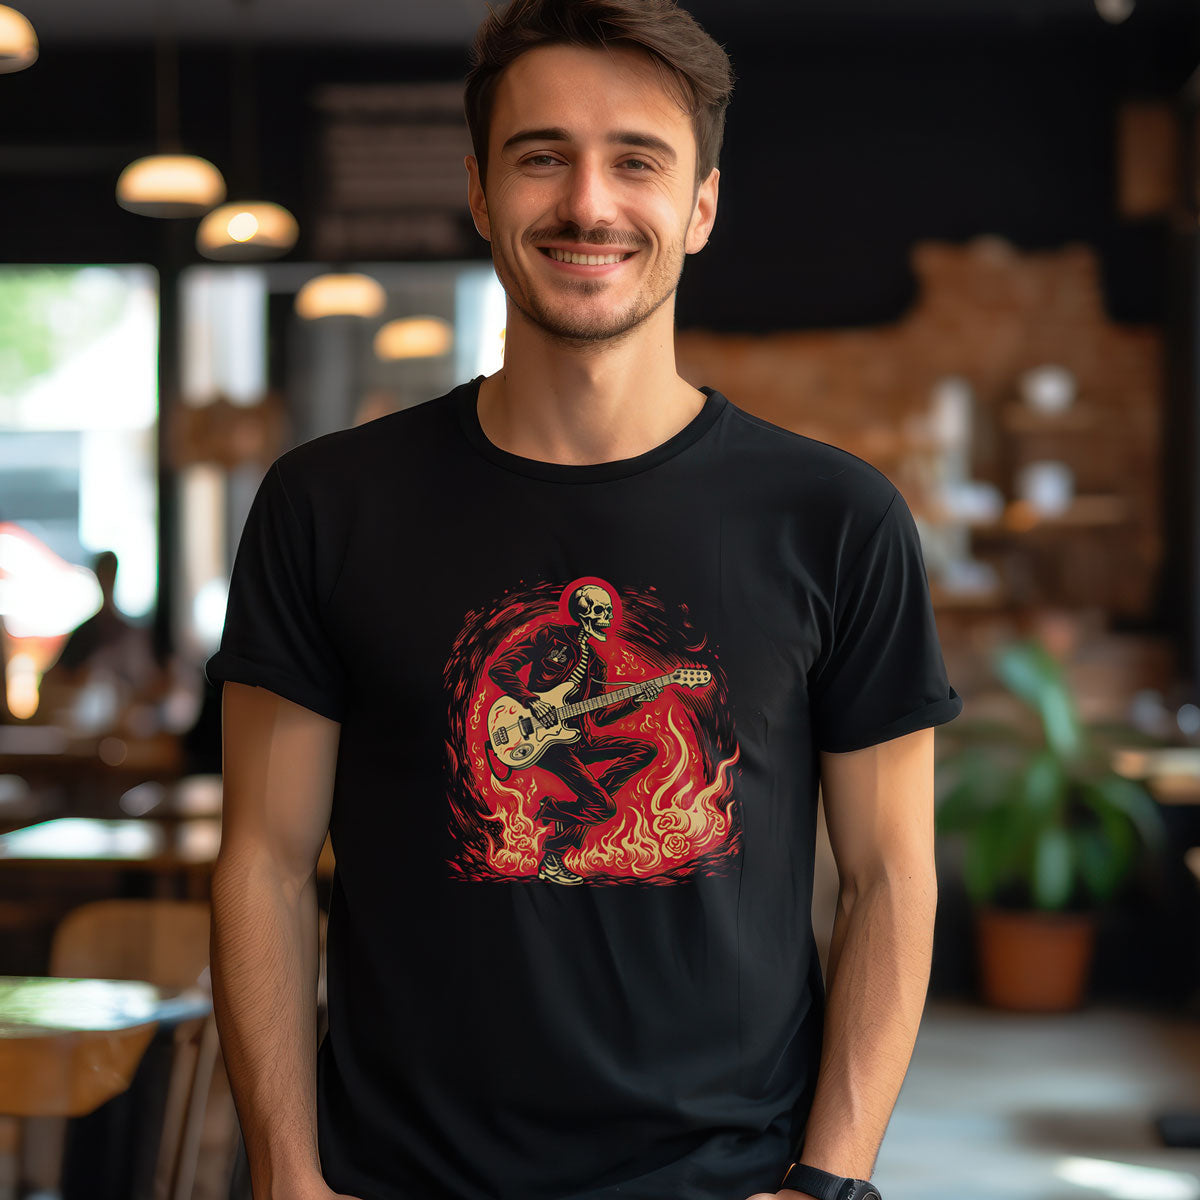 guy in a cafe wearing a black t-shirt with flaming skeleton guitarist print